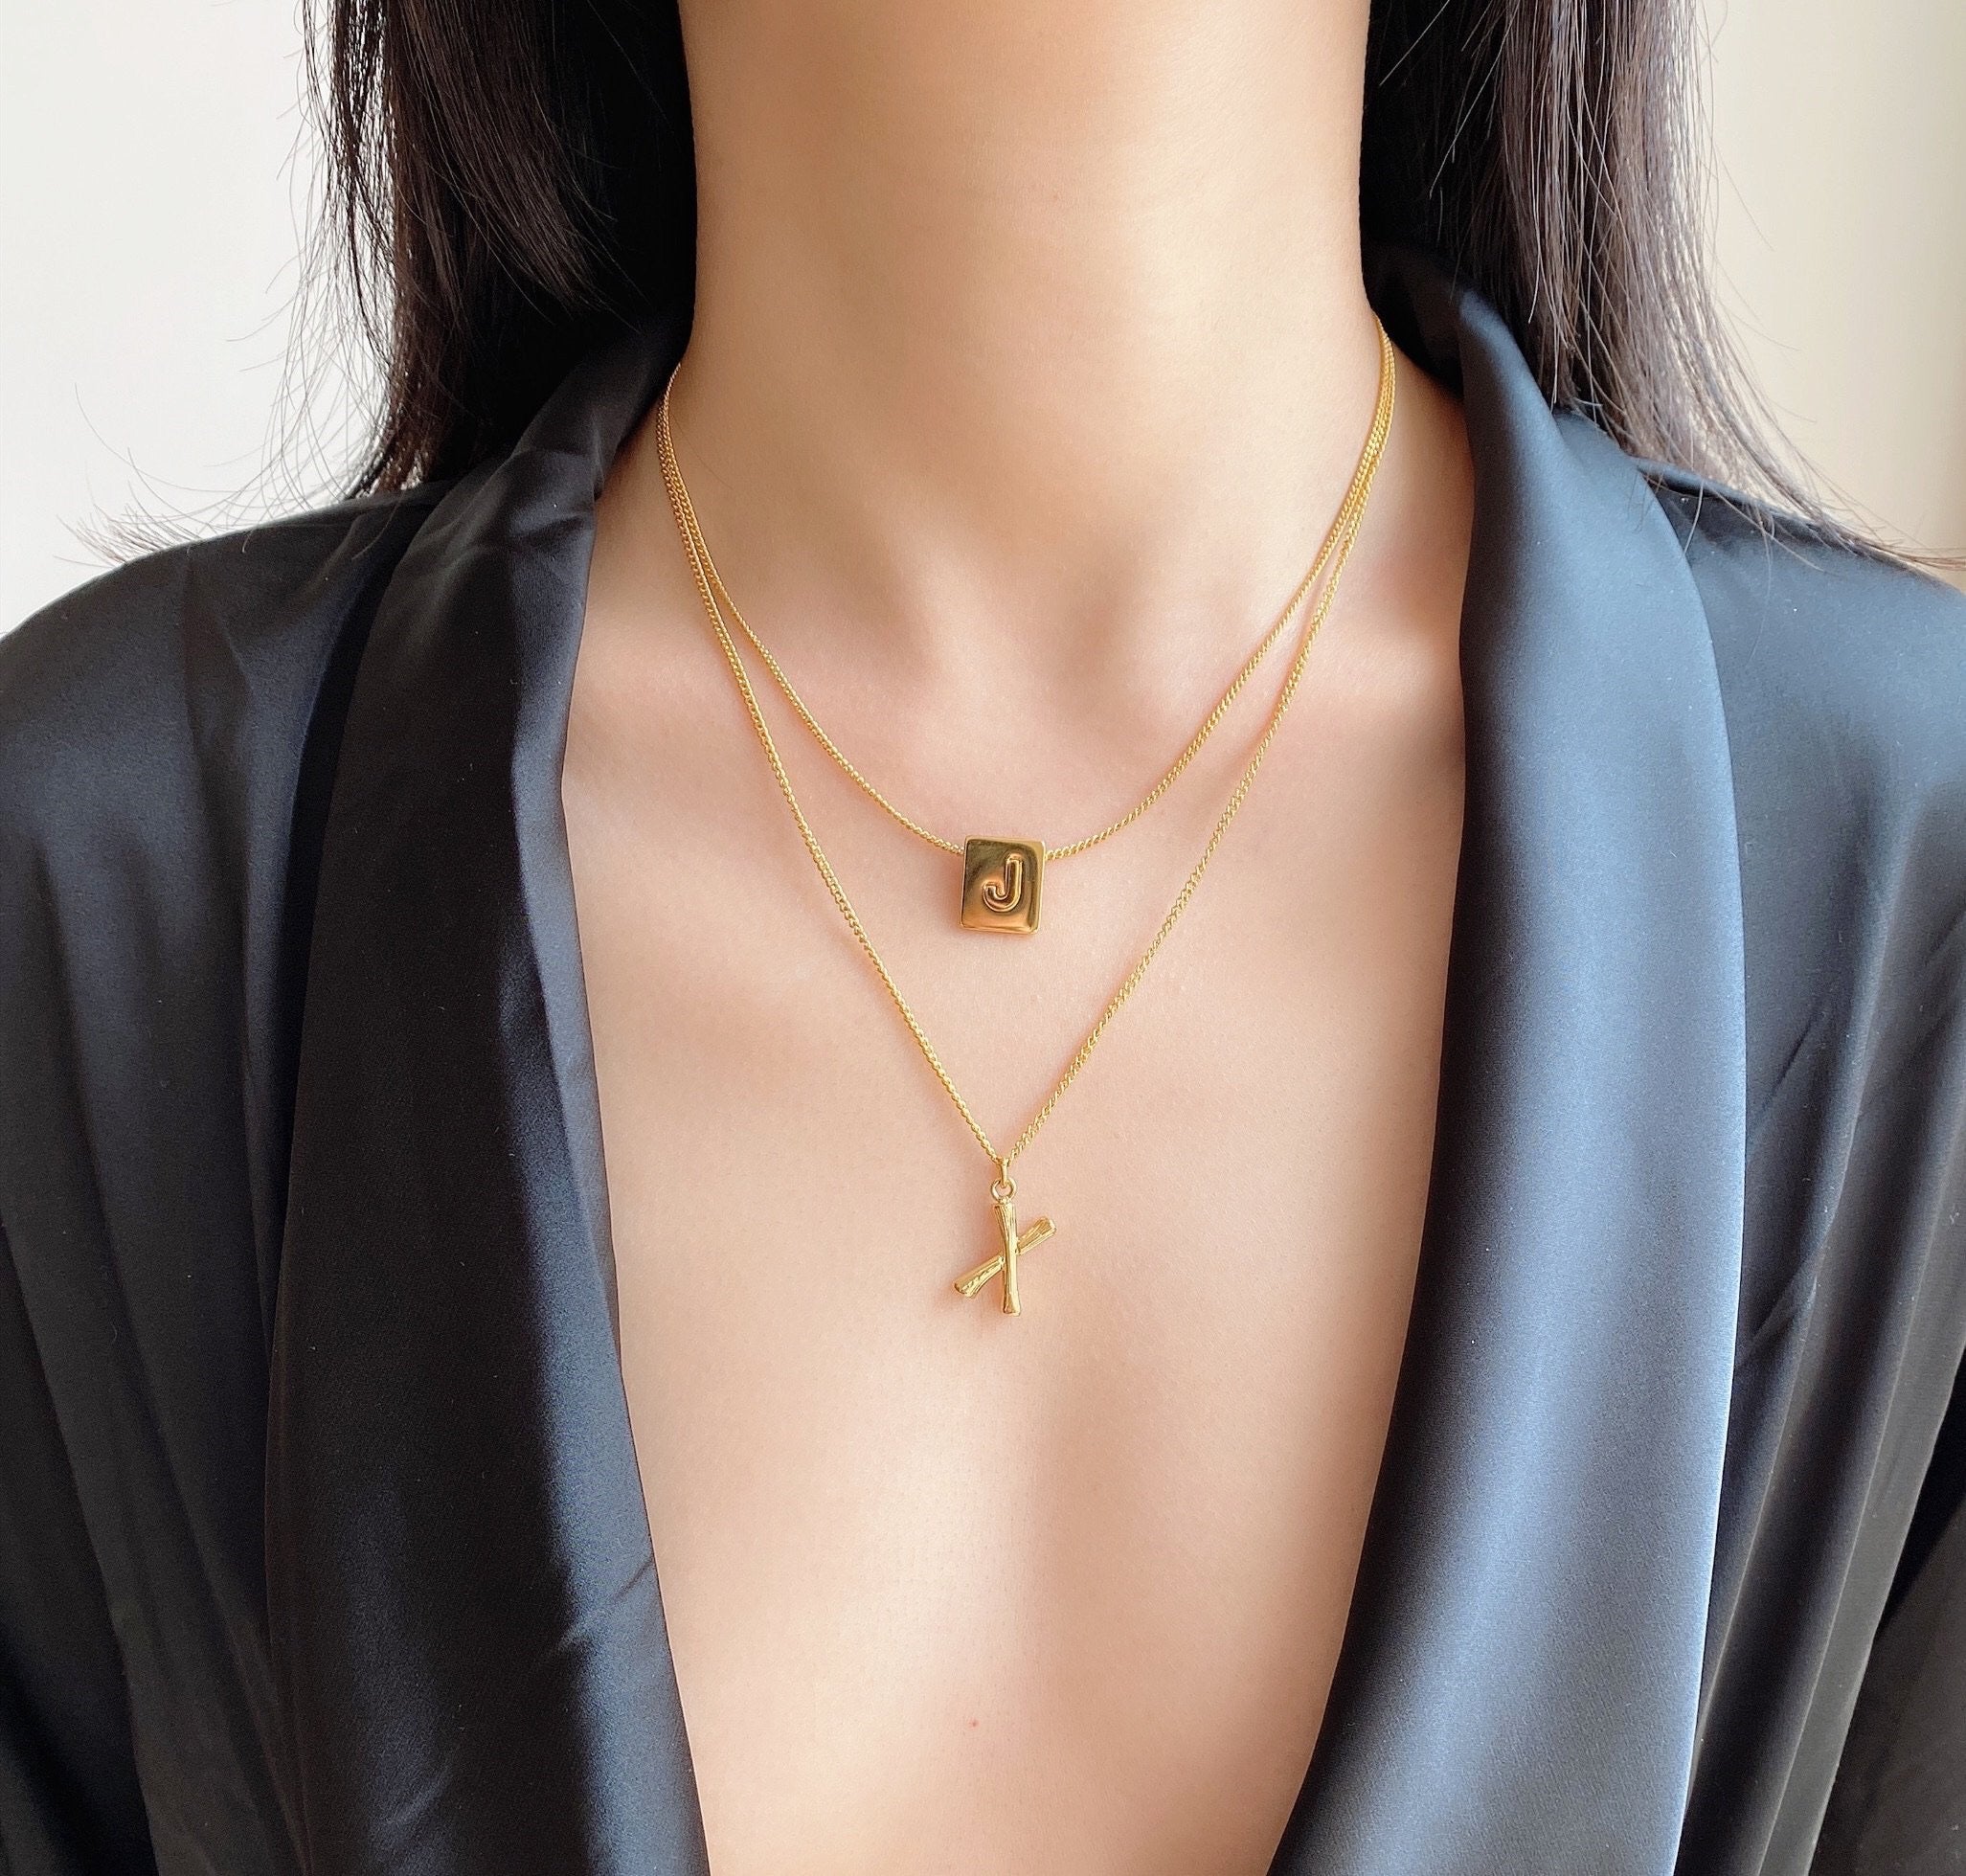 Square Initial Necklace, 14K Gold Filled, Square Pendant Necklace, Initial  Necklace Gold, Paperclip Initial Necklace, Birthday Gift Necklace - Etsy  Norway